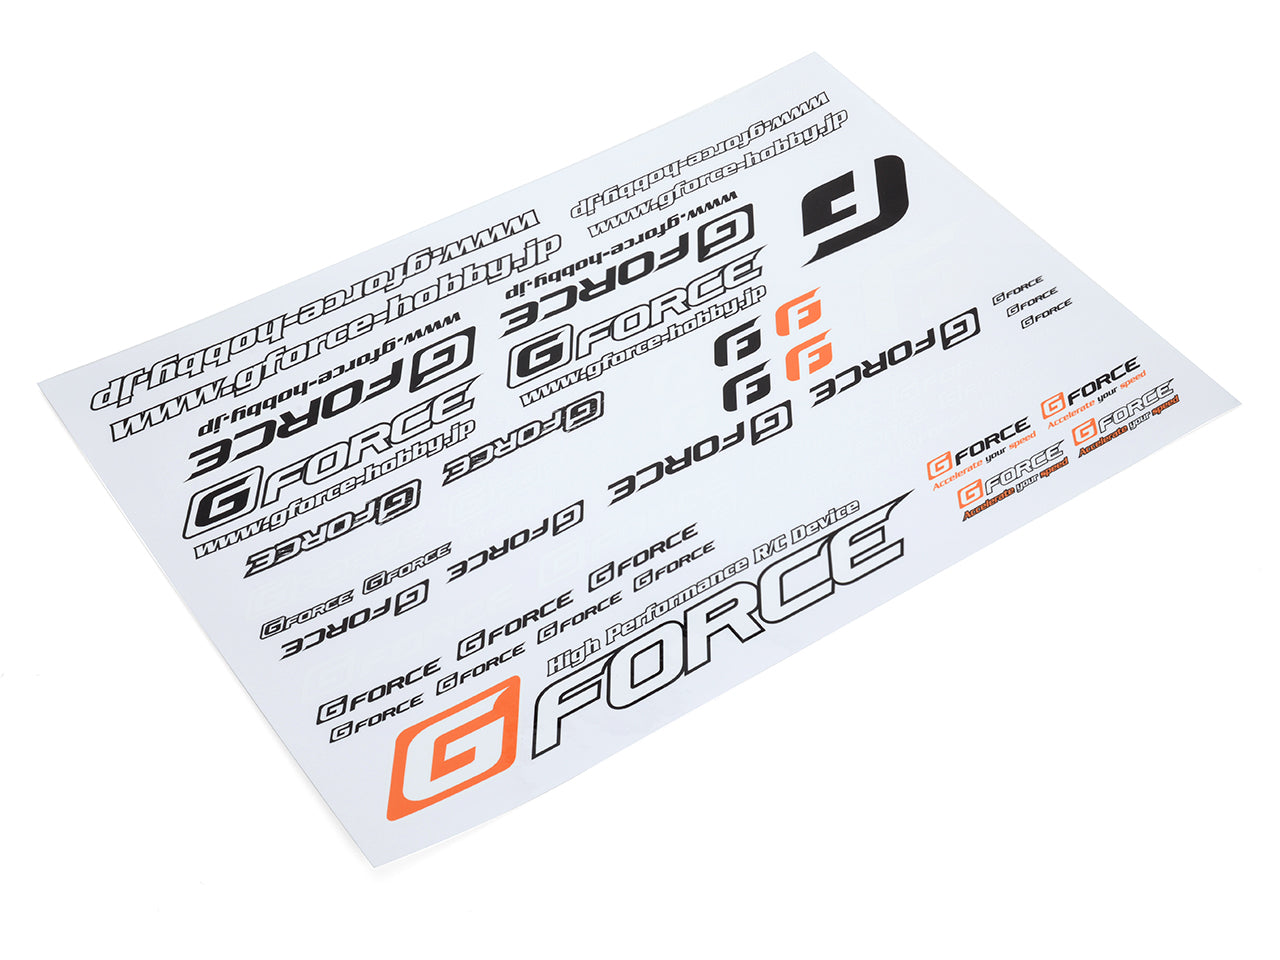 G0280 G-FORCE Decal Ver.2